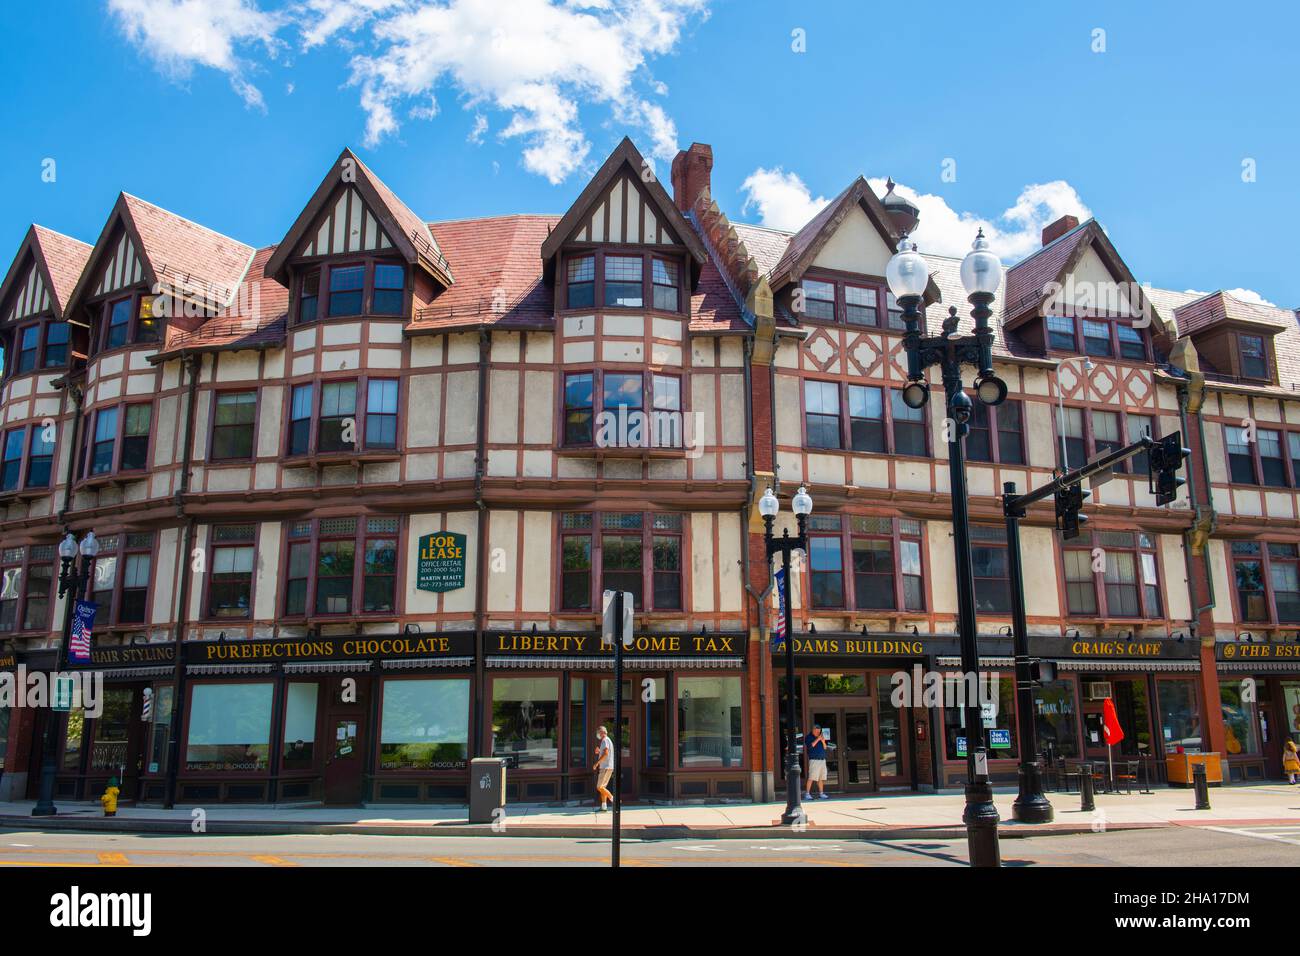 Adams Building, built in 1880, is a historical commercial building with Tudor Revival style at 1354 Hancock Street in Quincy city center, Massachusett Stock Photo